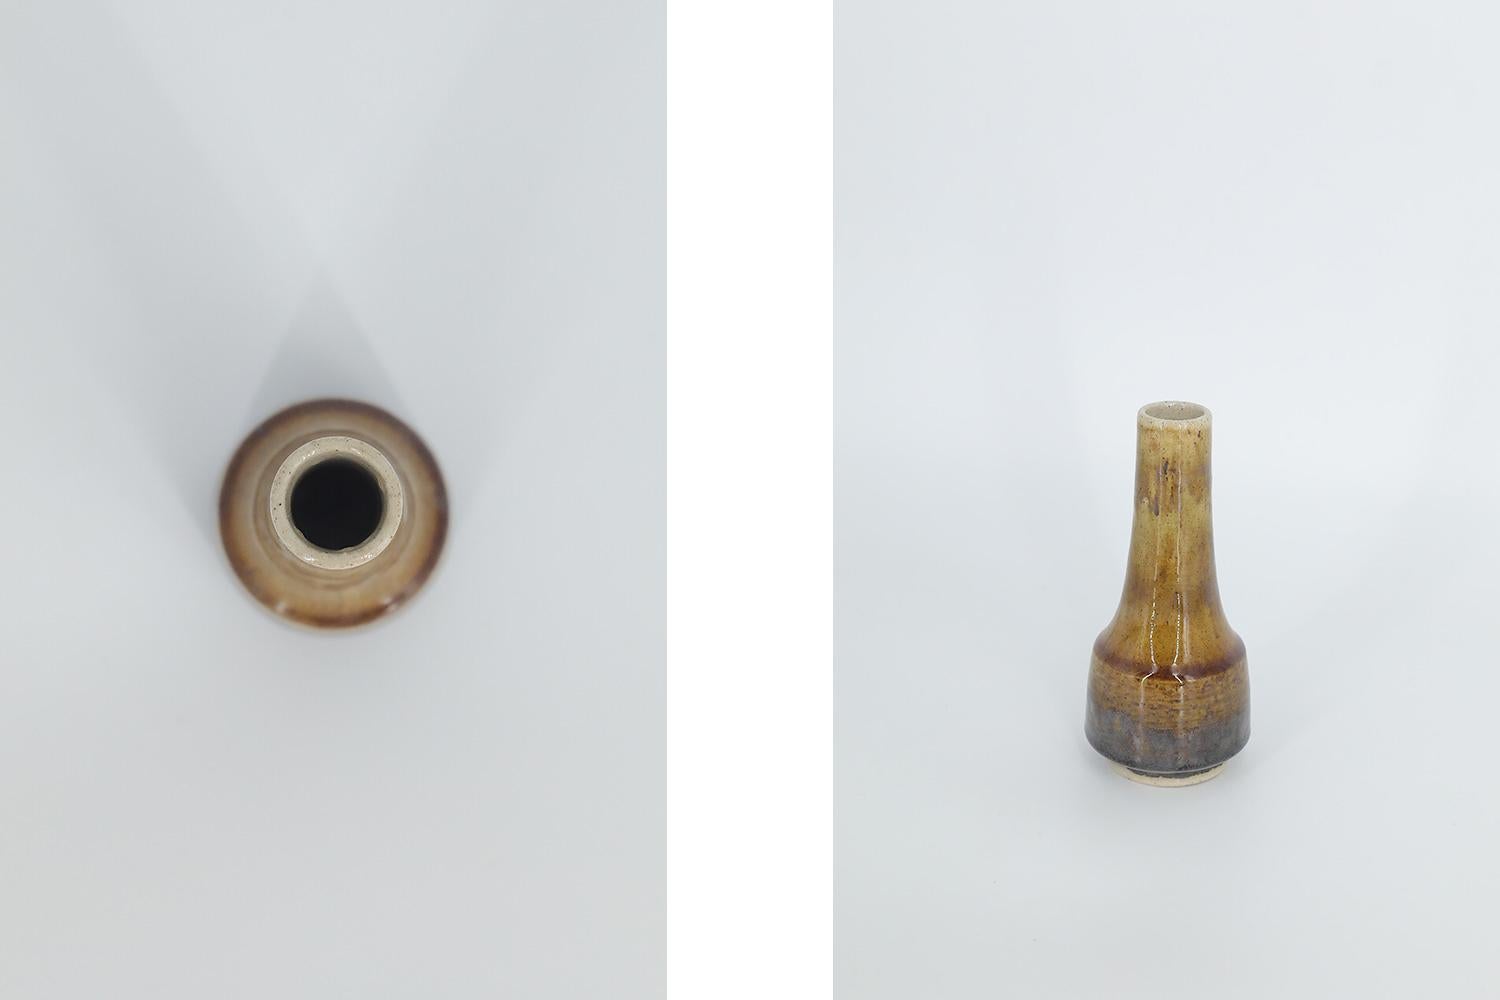 This miniature, collectible stoneware vase was designed by Gunnar Borg for the Swedish manufacture Höganäs Keramik during the 1960s. Handmade by a Master, with the utmost care and attention to details. The vase in brown and earthy colors. Glazed.